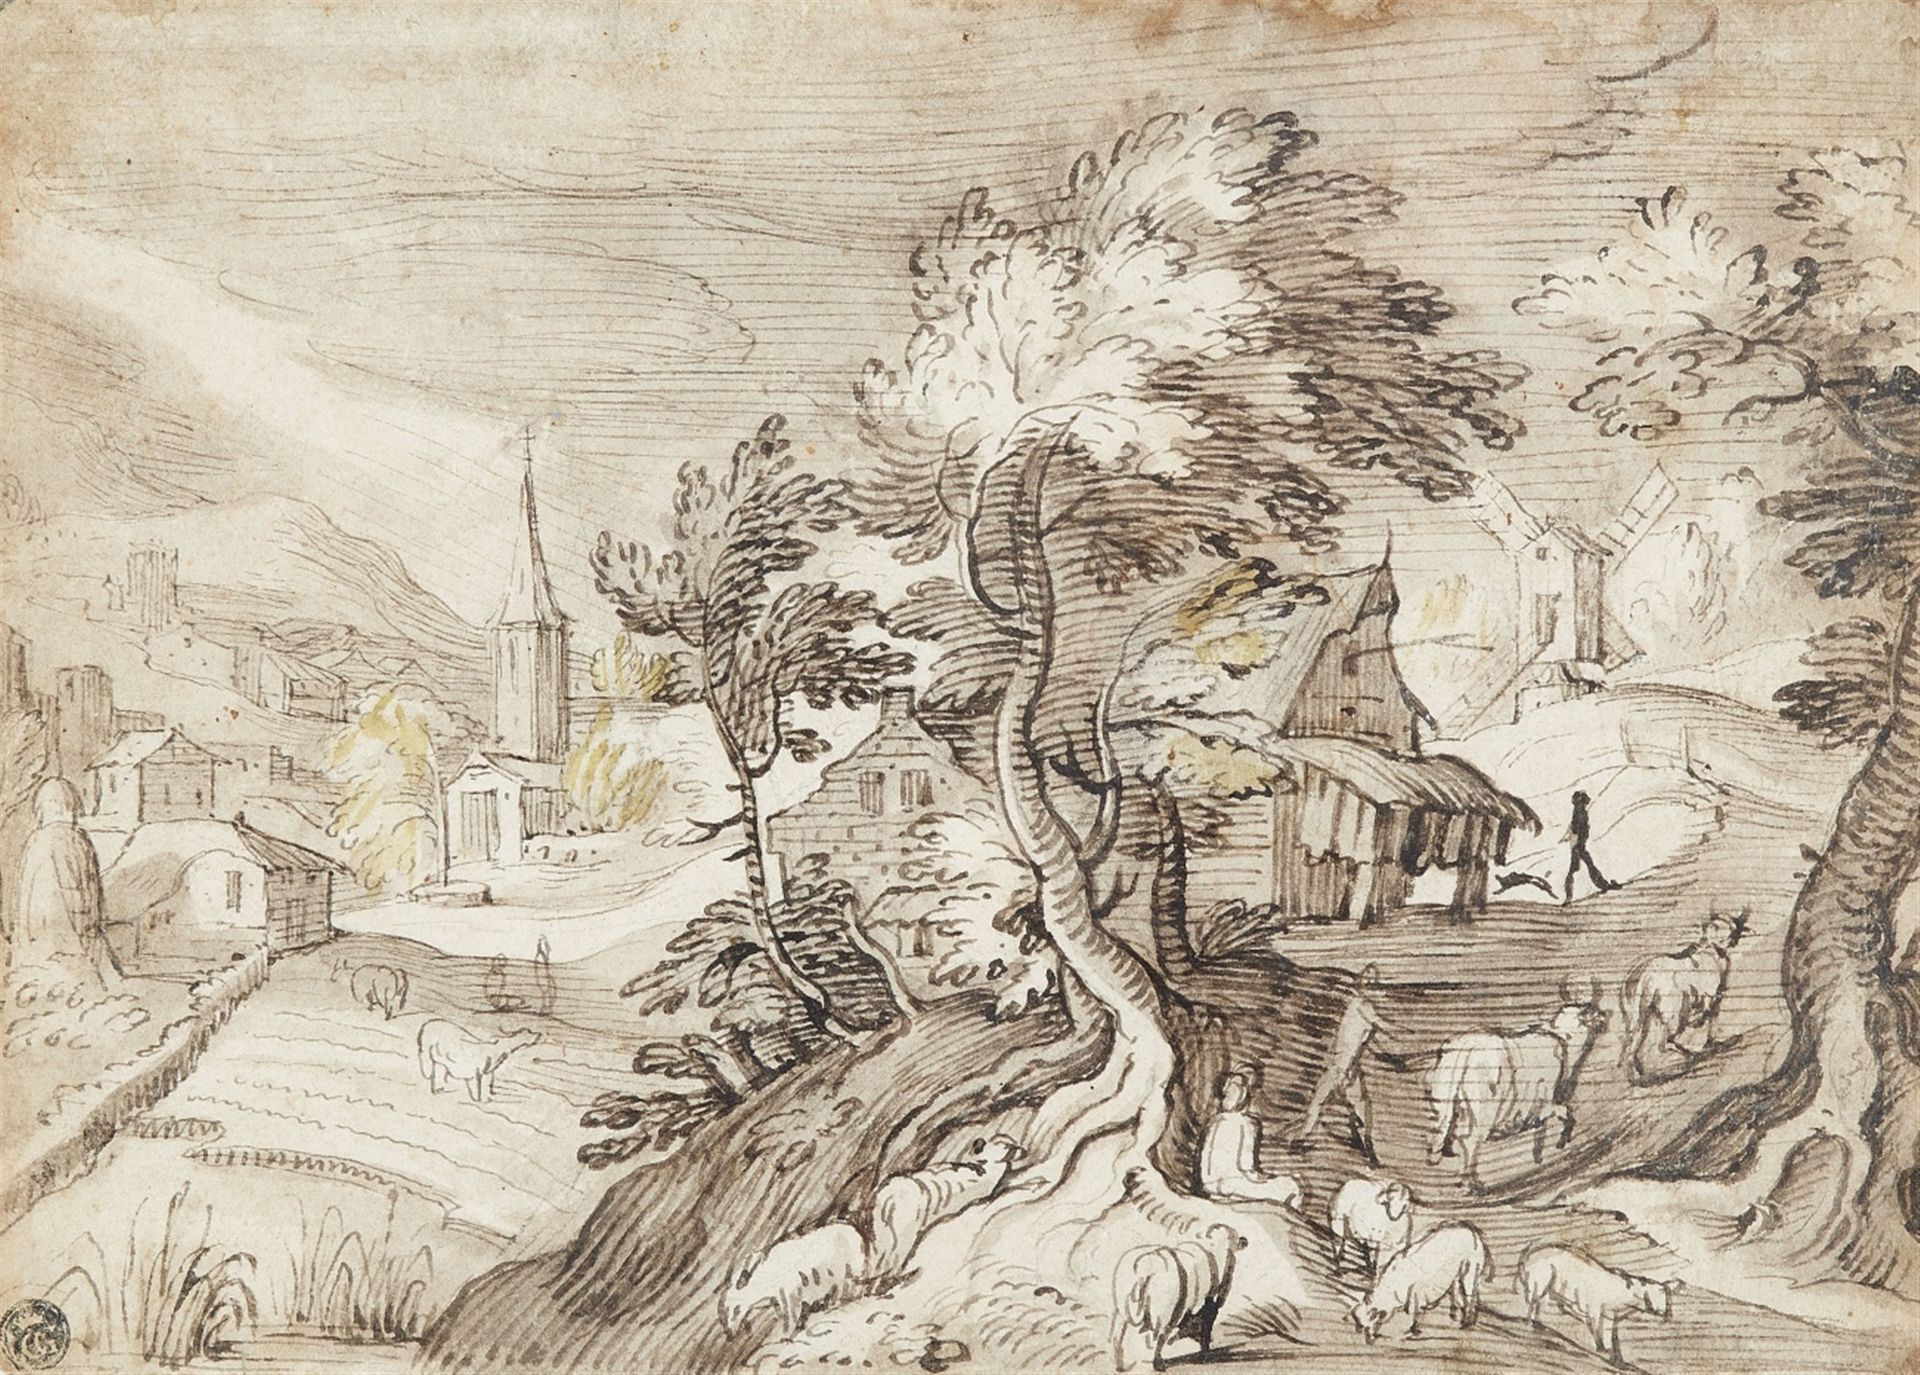 Jacob Grimmer, attributed to<BR>Shepherds in a Hilly Landscape